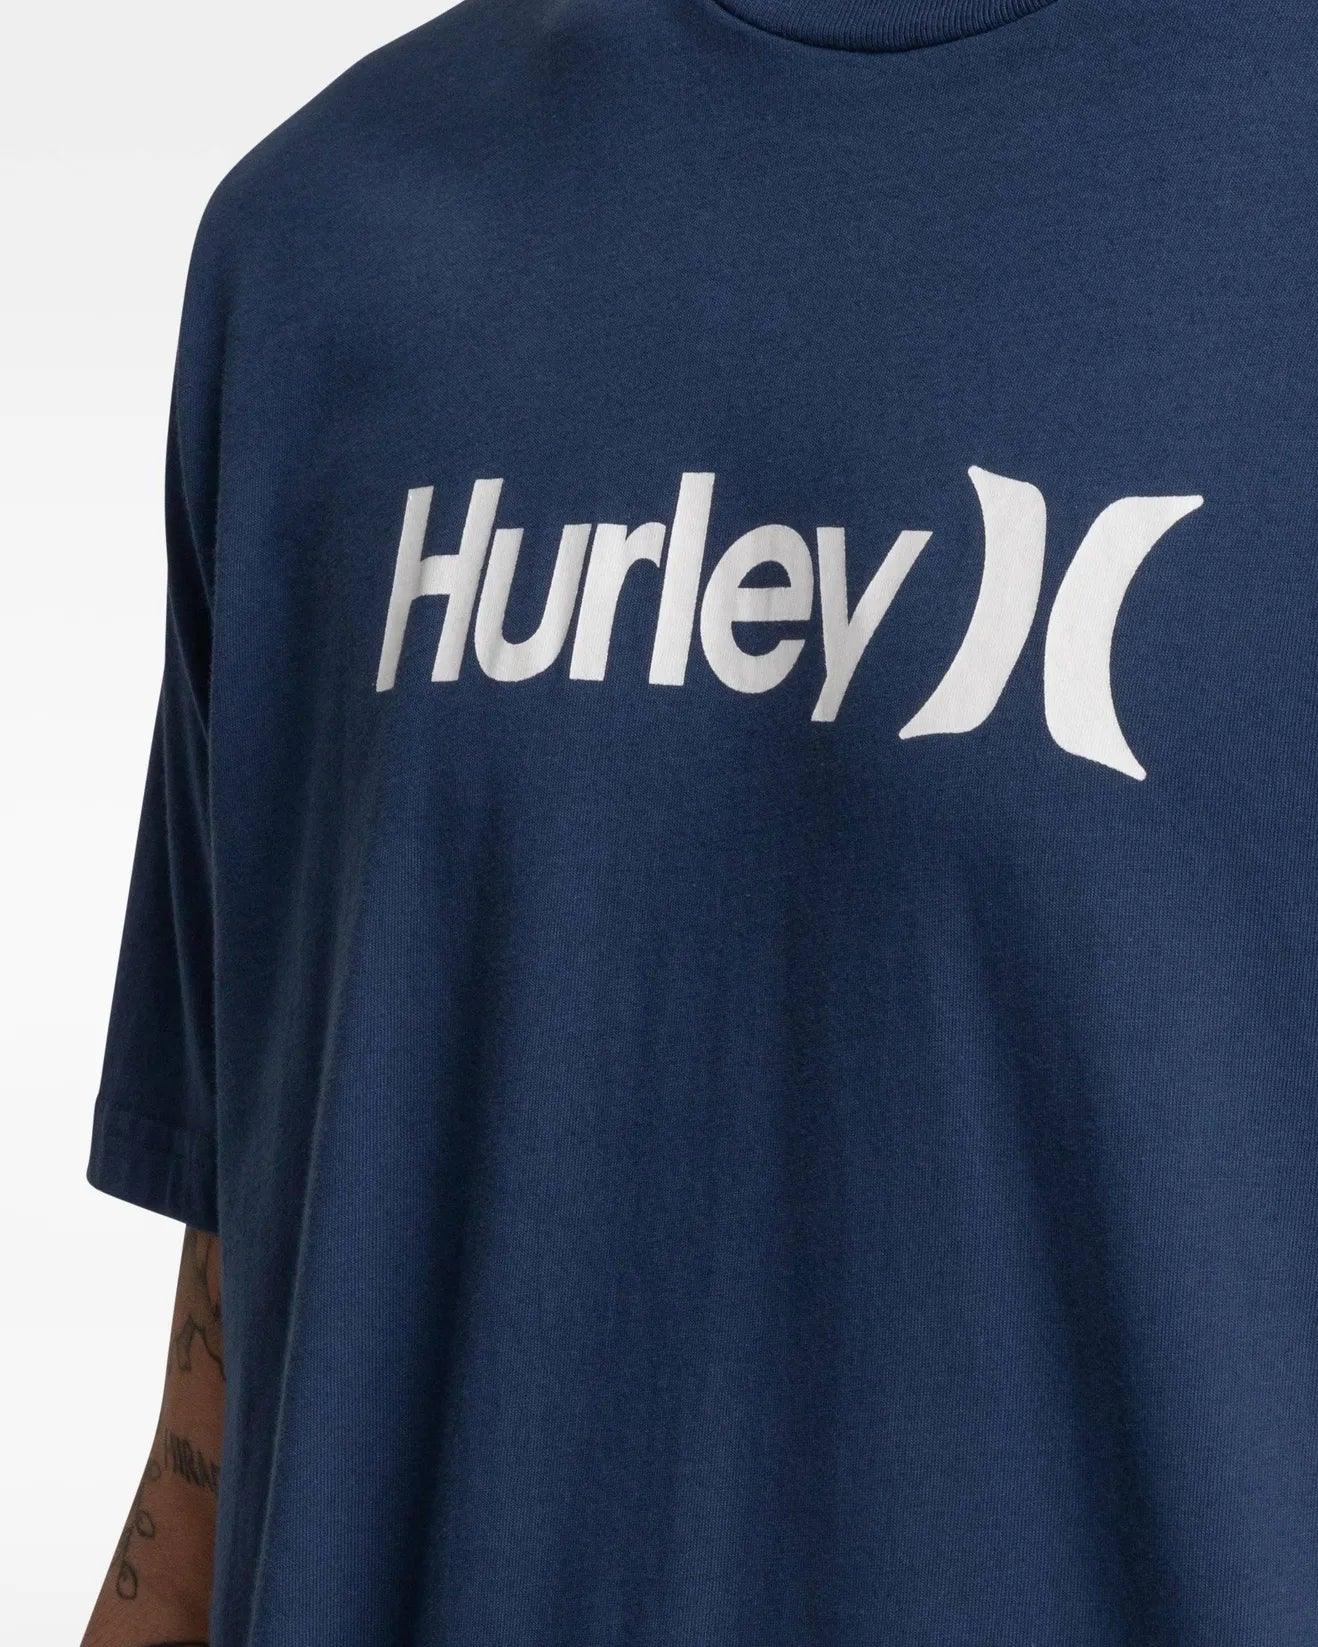 Hurley Surf Brand T Shirt, Mens Medium, Blue With Colored Graphics